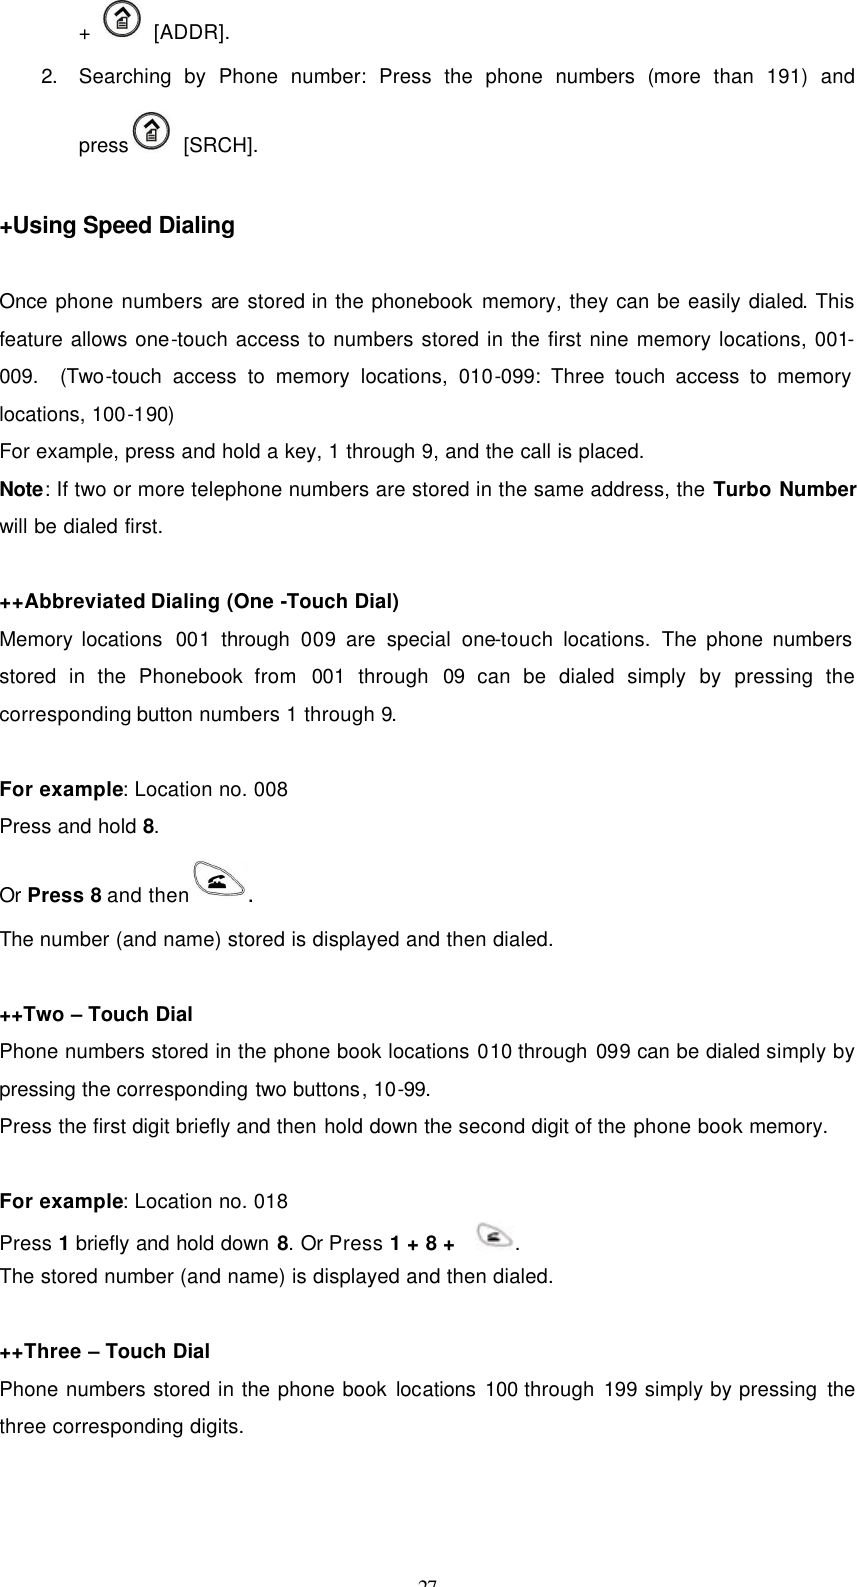 27 +   [ADDR]. 2. Searching by Phone number: Press the phone numbers (more than 191) and press  [SRCH].  +Using Speed Dialing  Once phone numbers are stored in the phonebook memory, they can be easily dialed. This feature allows one-touch access to numbers stored in the first nine memory locations, 001-009.  (Two-touch access to memory locations, 010-099: Three touch access to memory locations, 100-190)   For example, press and hold a key, 1 through 9, and the call is placed. Note: If two or more telephone numbers are stored in the same address, the Turbo Number will be dialed first.  ++Abbreviated Dialing (One -Touch Dial) Memory locations  001 through 009 are special one-touch locations.  The phone numbers stored in the Phonebook from  001 through 09 can be dialed simply by pressing the corresponding button numbers 1 through 9.  For example: Location no. 008 Press and hold 8.     Or Press 8 and then . The number (and name) stored is displayed and then dialed.   ++Two – Touch Dial Phone numbers stored in the phone book locations 010 through 099 can be dialed simply by pressing the corresponding two buttons, 10-99. Press the first digit briefly and then hold down the second digit of the phone book memory.  For example: Location no. 018 Press 1 briefly and hold down 8. Or Press 1 + 8 +    . The stored number (and name) is displayed and then dialed.  ++Three – Touch Dial Phone numbers stored in the phone book locations 100 through 199 simply by pressing the three corresponding digits. 